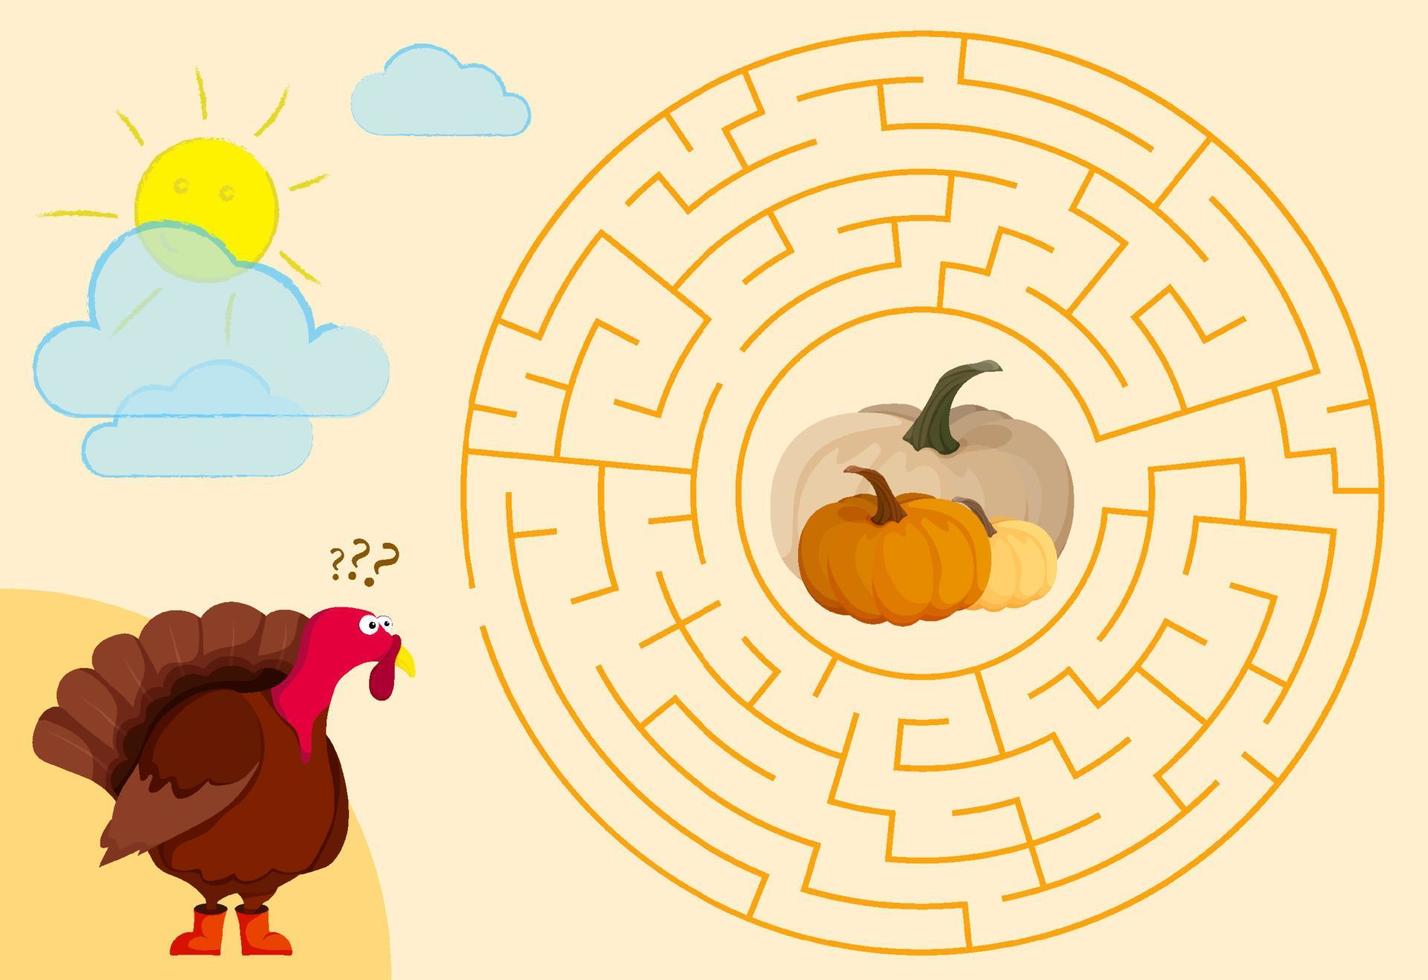 Children games. Round maze, labyrinth. Hungry turkey. Help the turkey find its way through the maze to pumpkins and have lunch. Vector